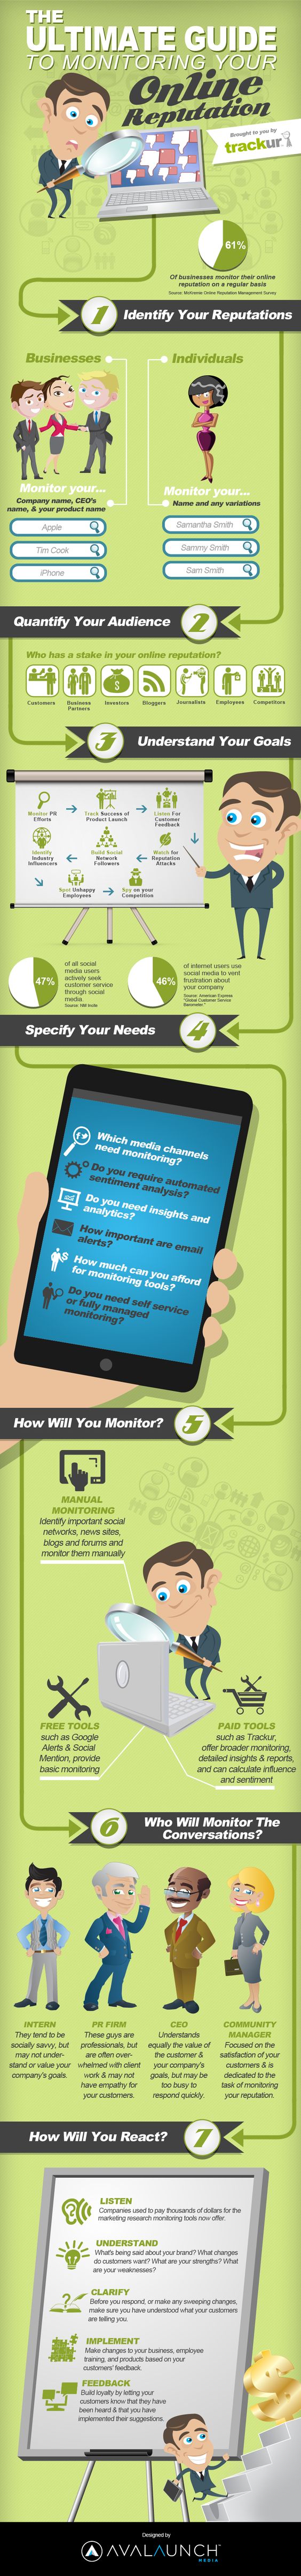 How to Monitor Your Online Reputation #Infographic